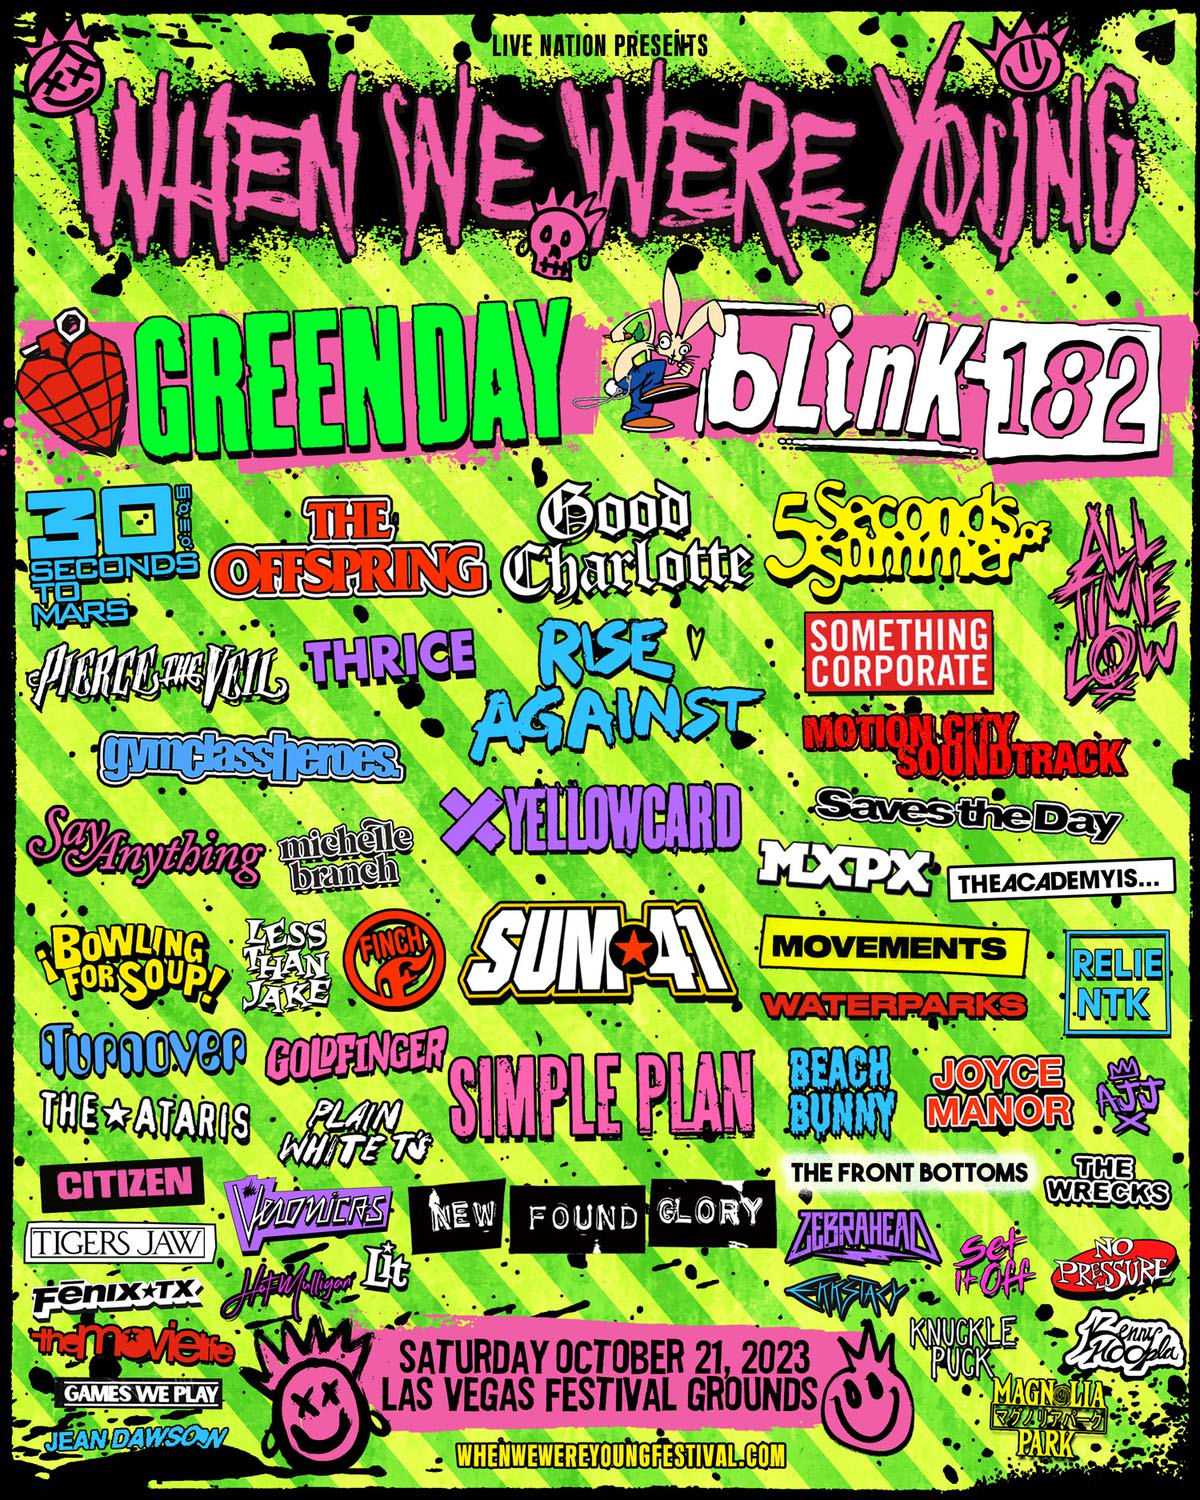 Green Day, Blink182 to headline When We Were Young's 2023 Las Vegas